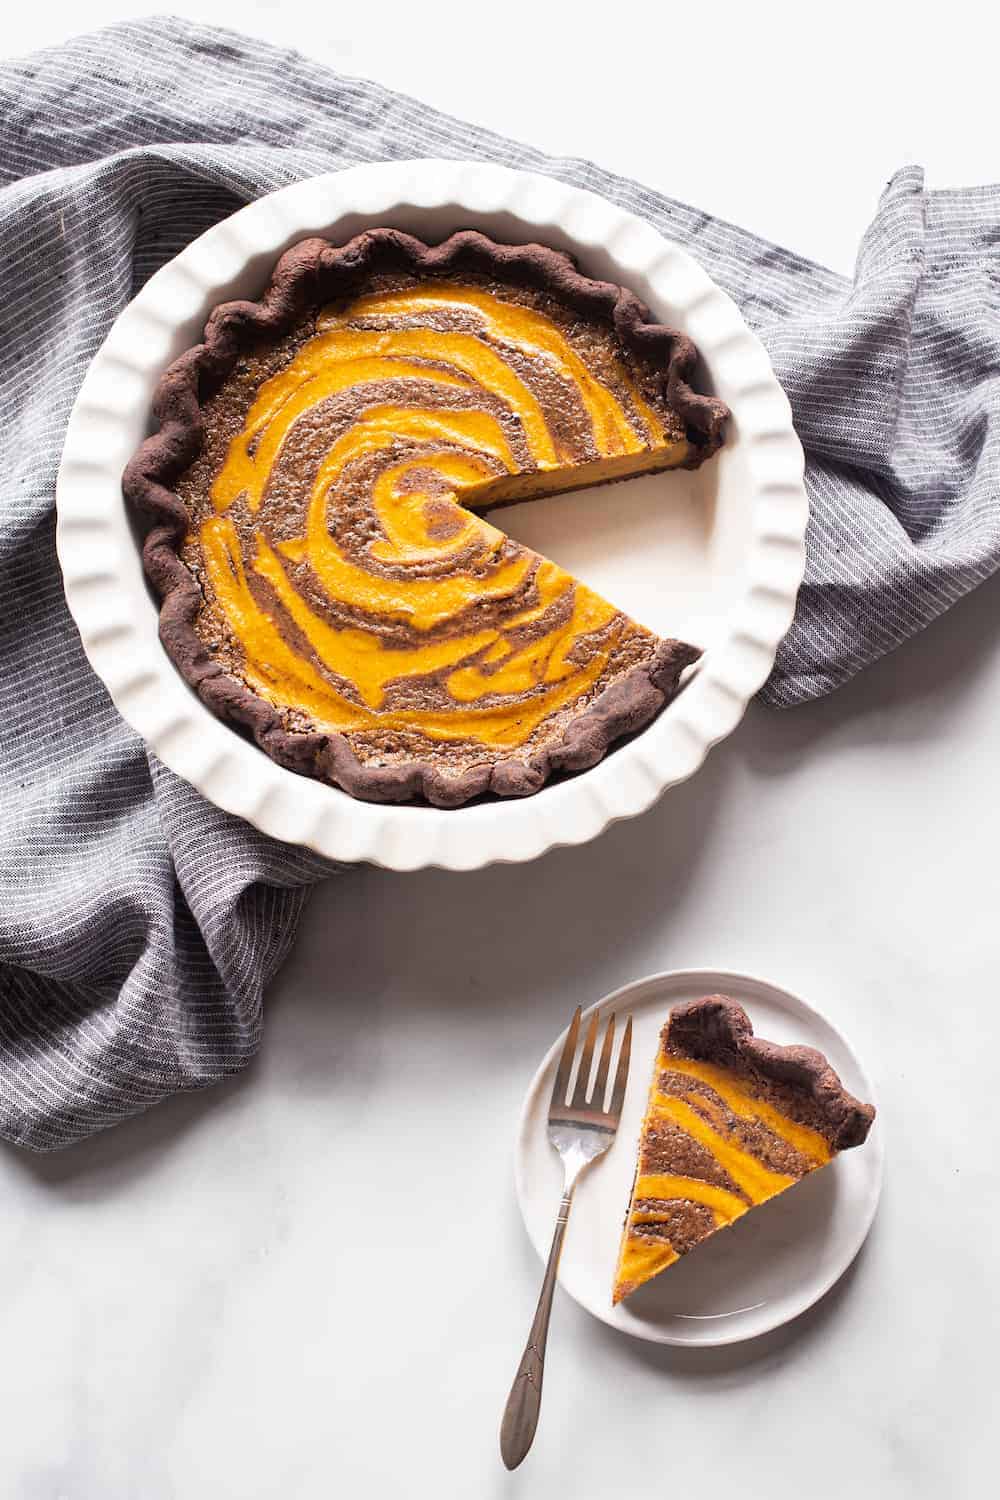 Butterscotch Pumpkin Chocolate Pie from Marbled, Swirled, and Layered